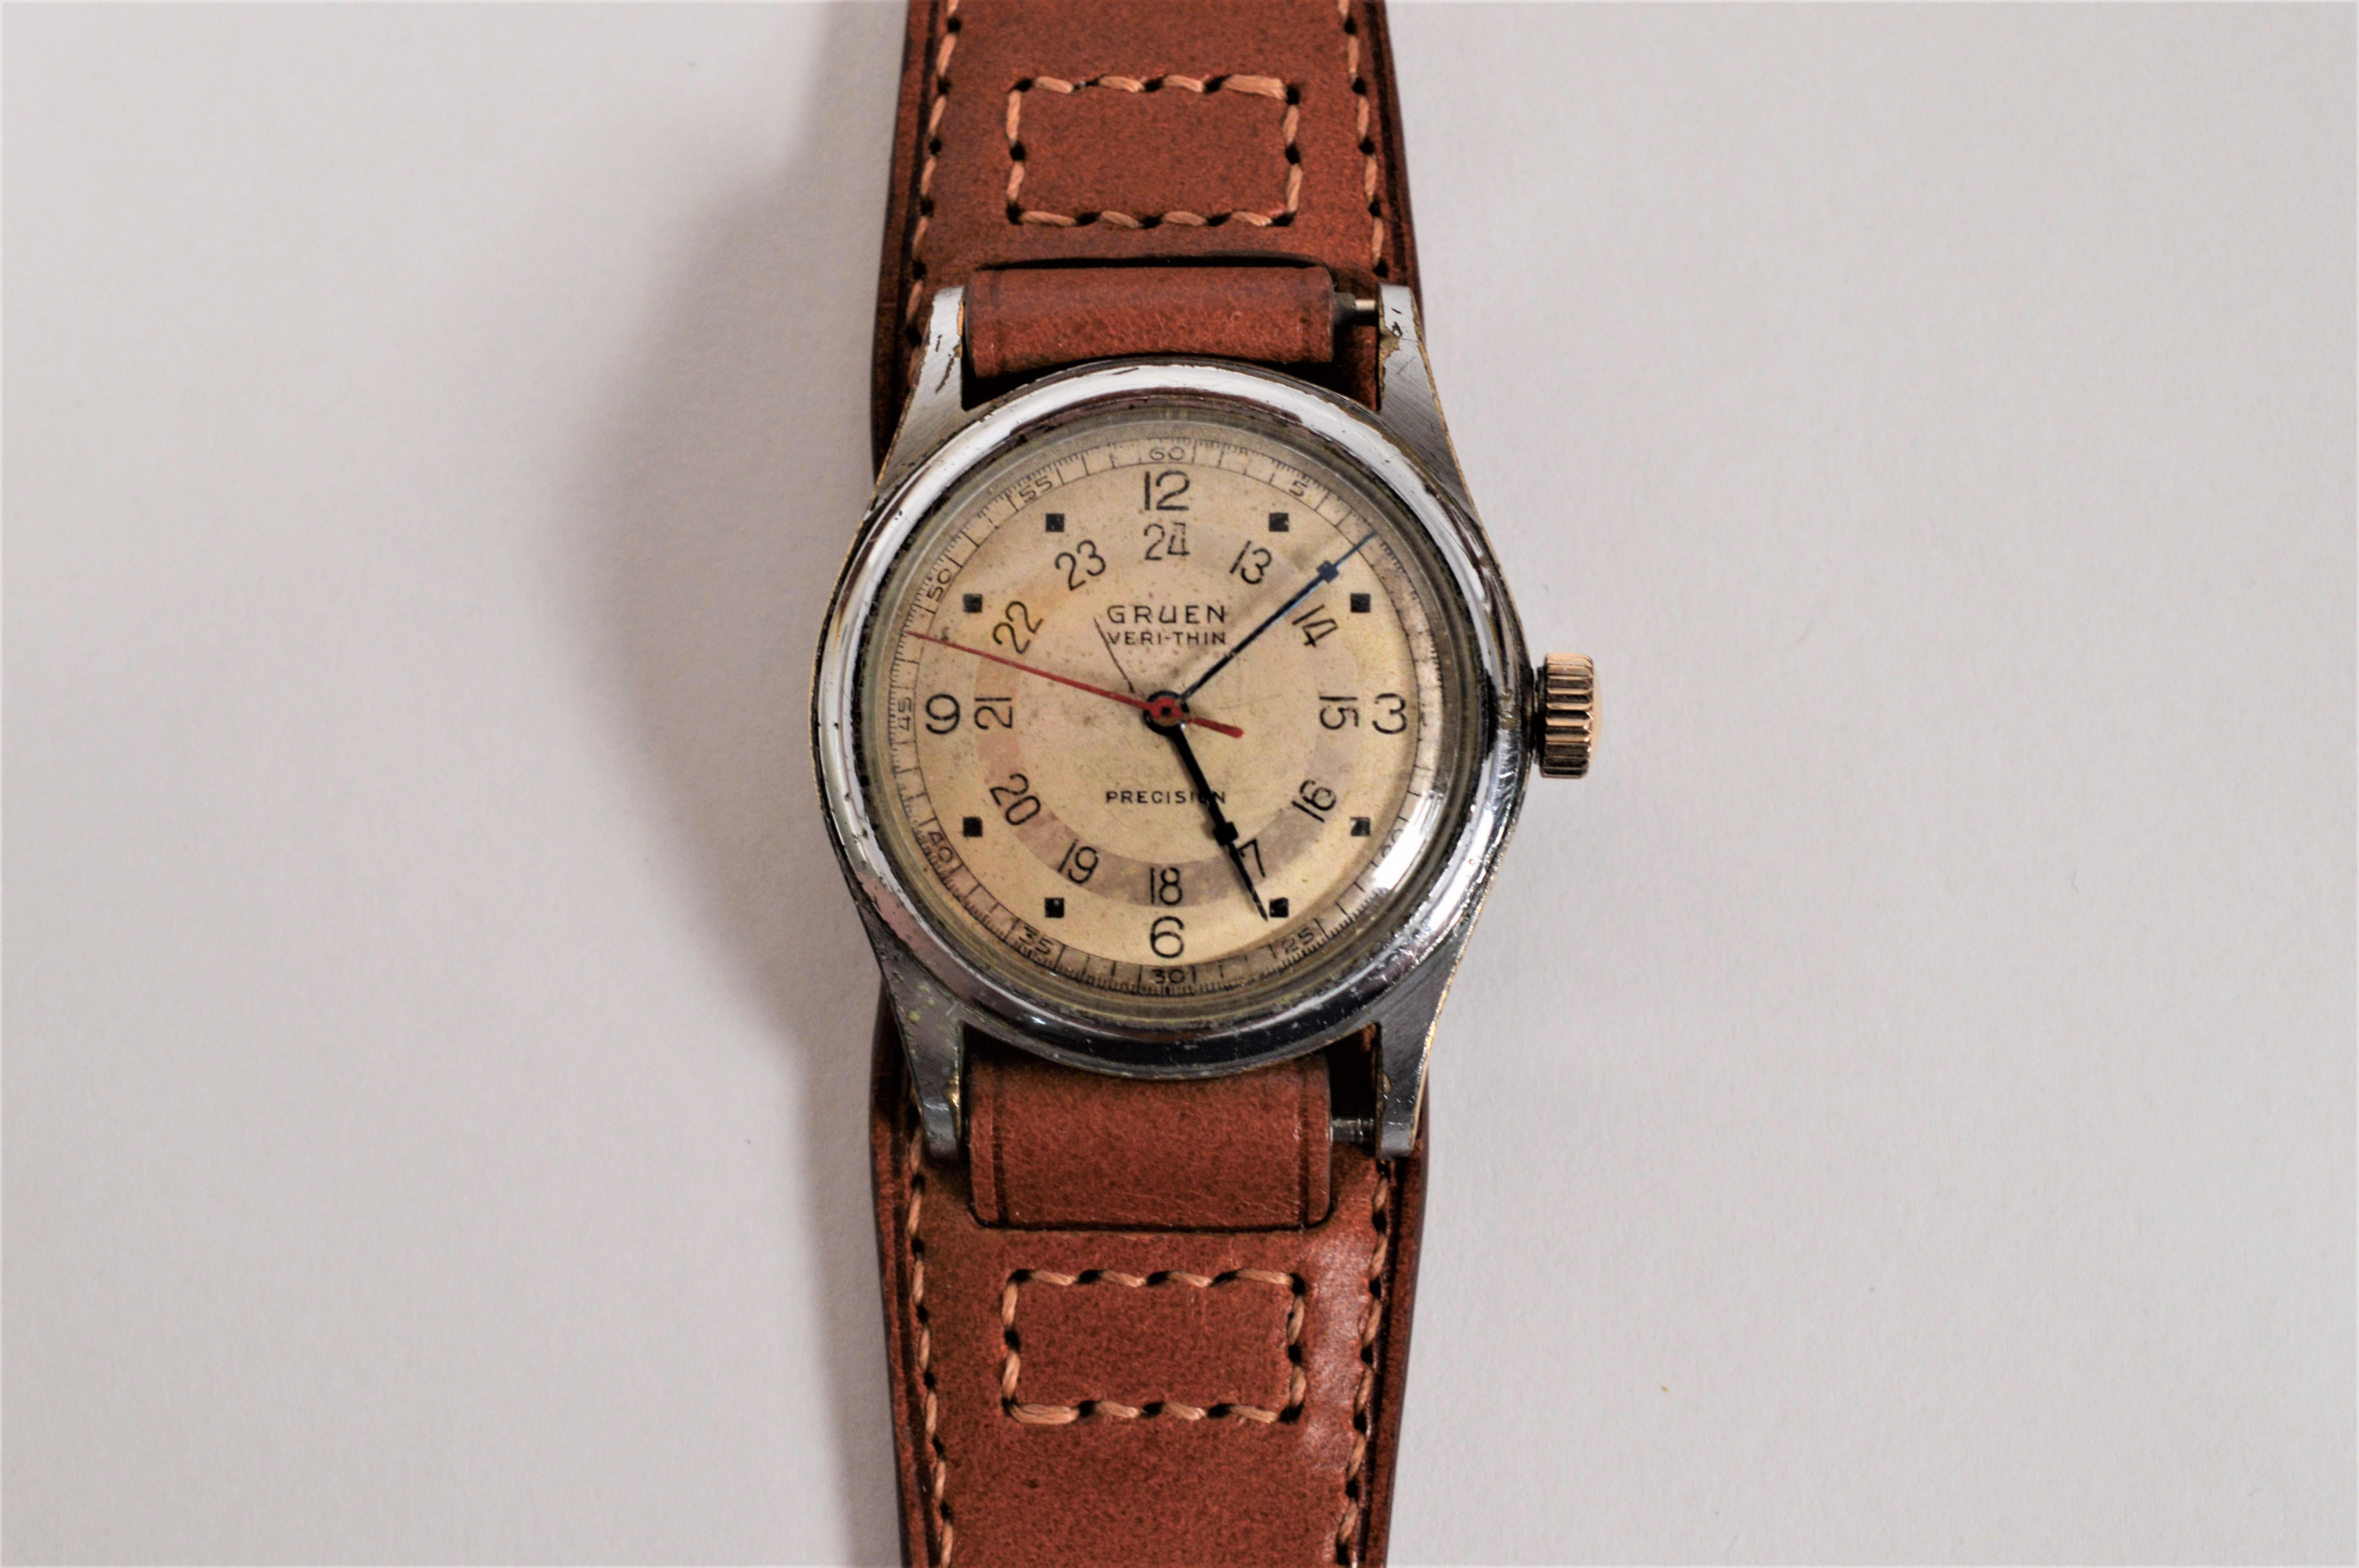 A vintage find and in its original condition, enjoy this circa 1940's Pan American Wrist Watch with Veri Thin movement developed and manufactured by Gruen Watch Co.  An American based company, Gruen was one of the largest watch manufacturers in the